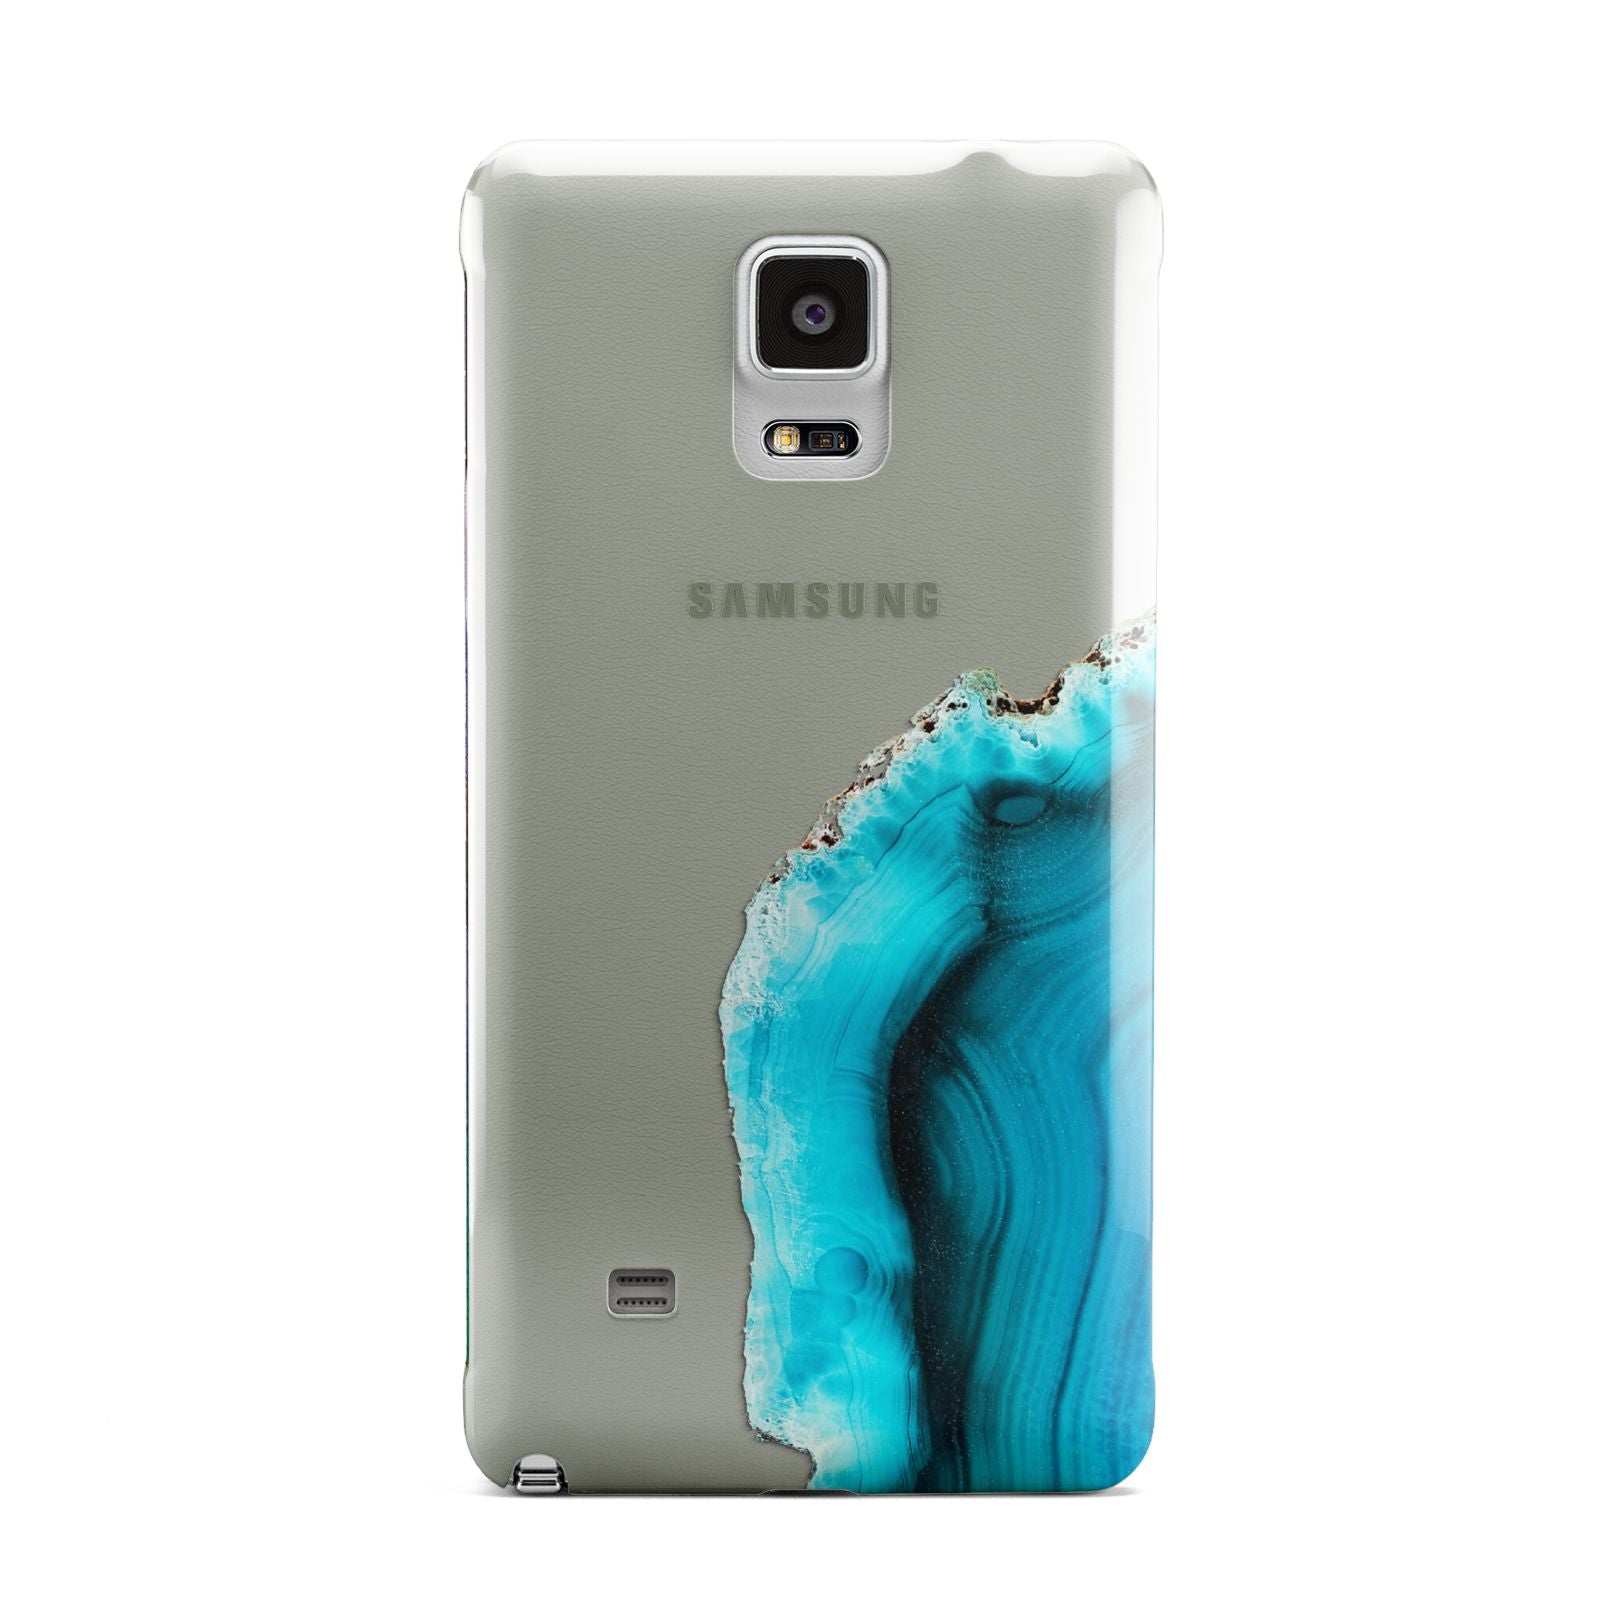 Agate Blue Turquoise Samsung Galaxy Note 4 Case